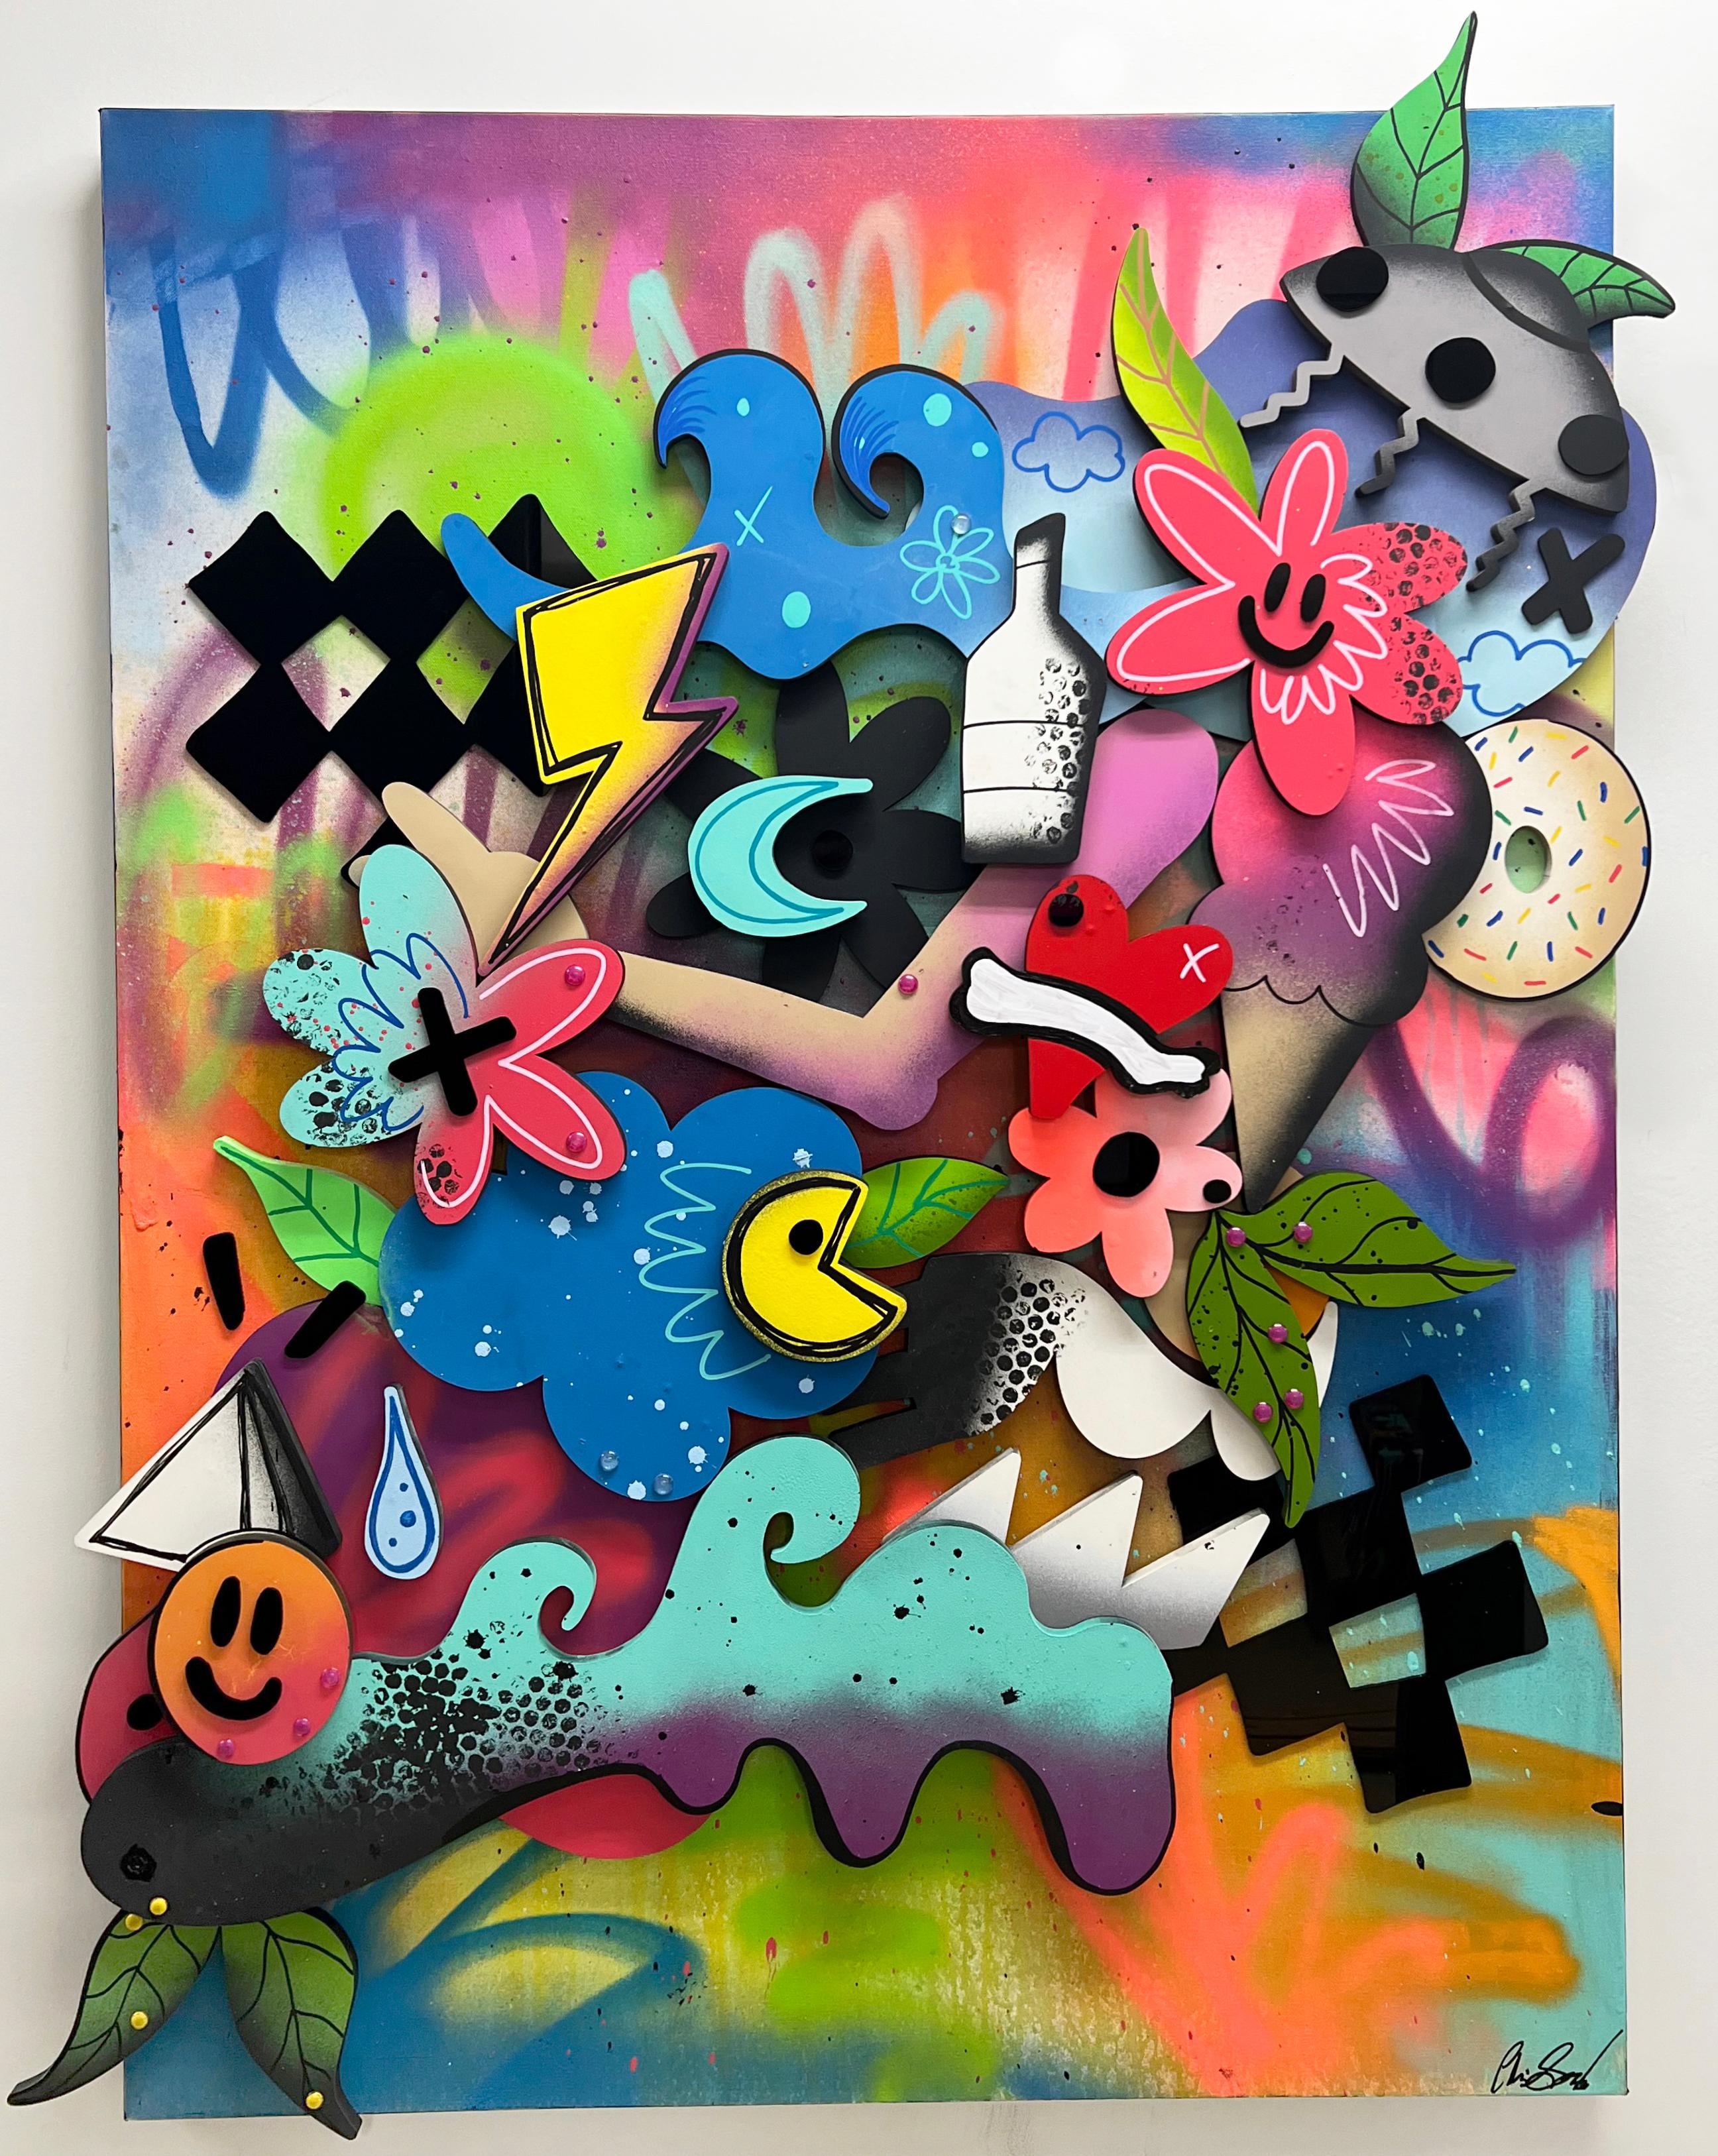 Chris Solcz Abstract Painting - Island of My Mind, 3D graffiti wall sculpture, spray paint, mdf, abstract, 2022